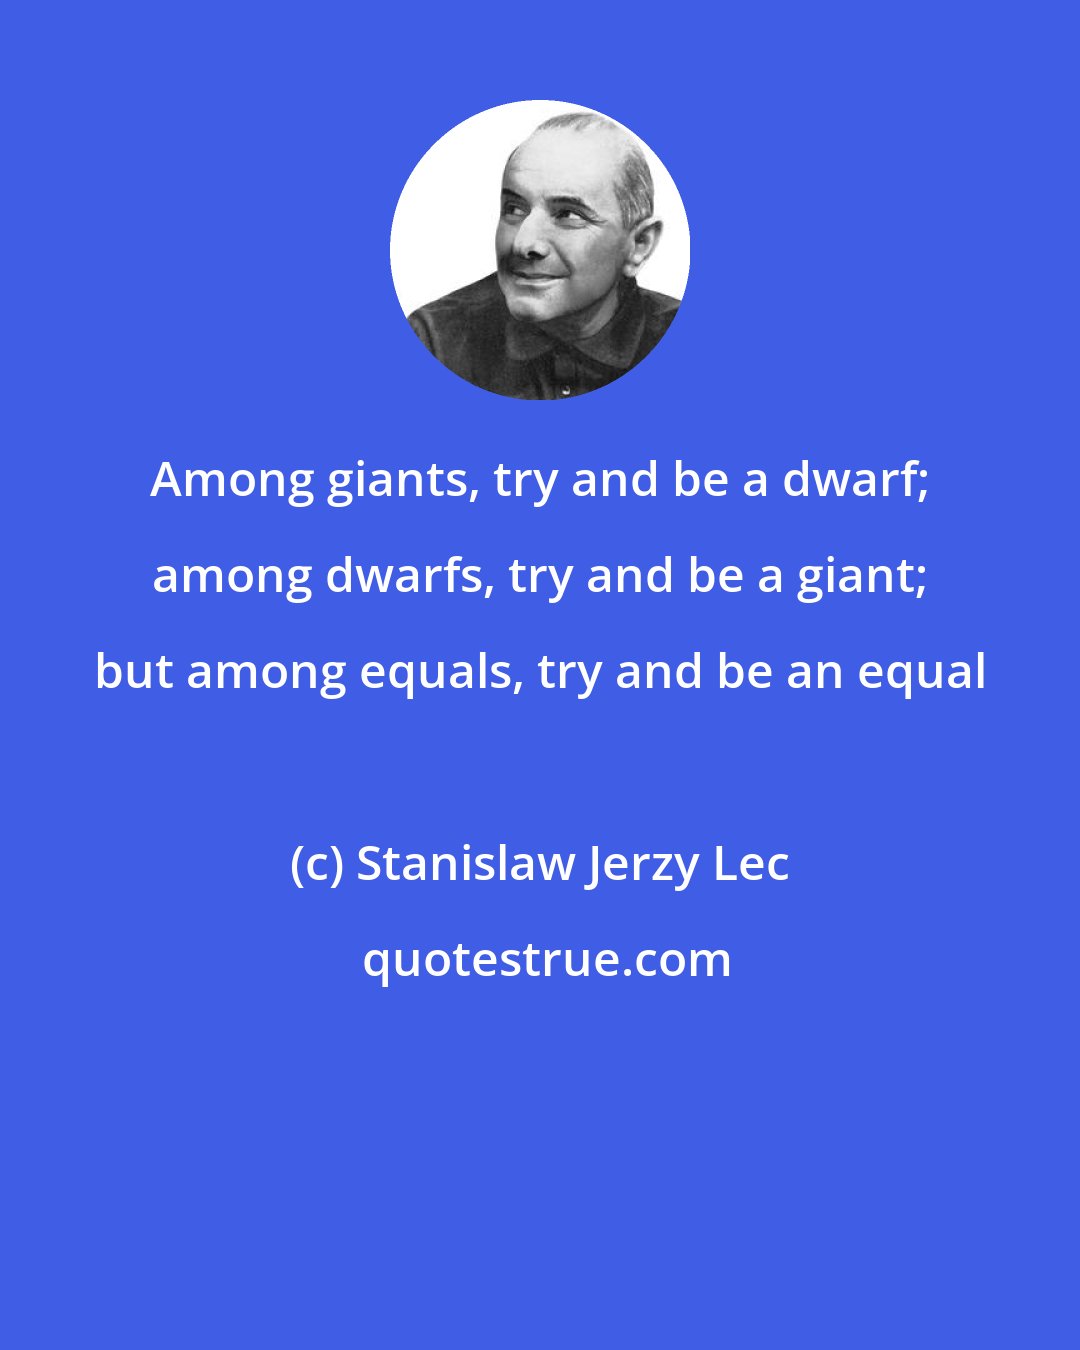 Stanislaw Jerzy Lec: Among giants, try and be a dwarf; among dwarfs, try and be a giant; but among equals, try and be an equal